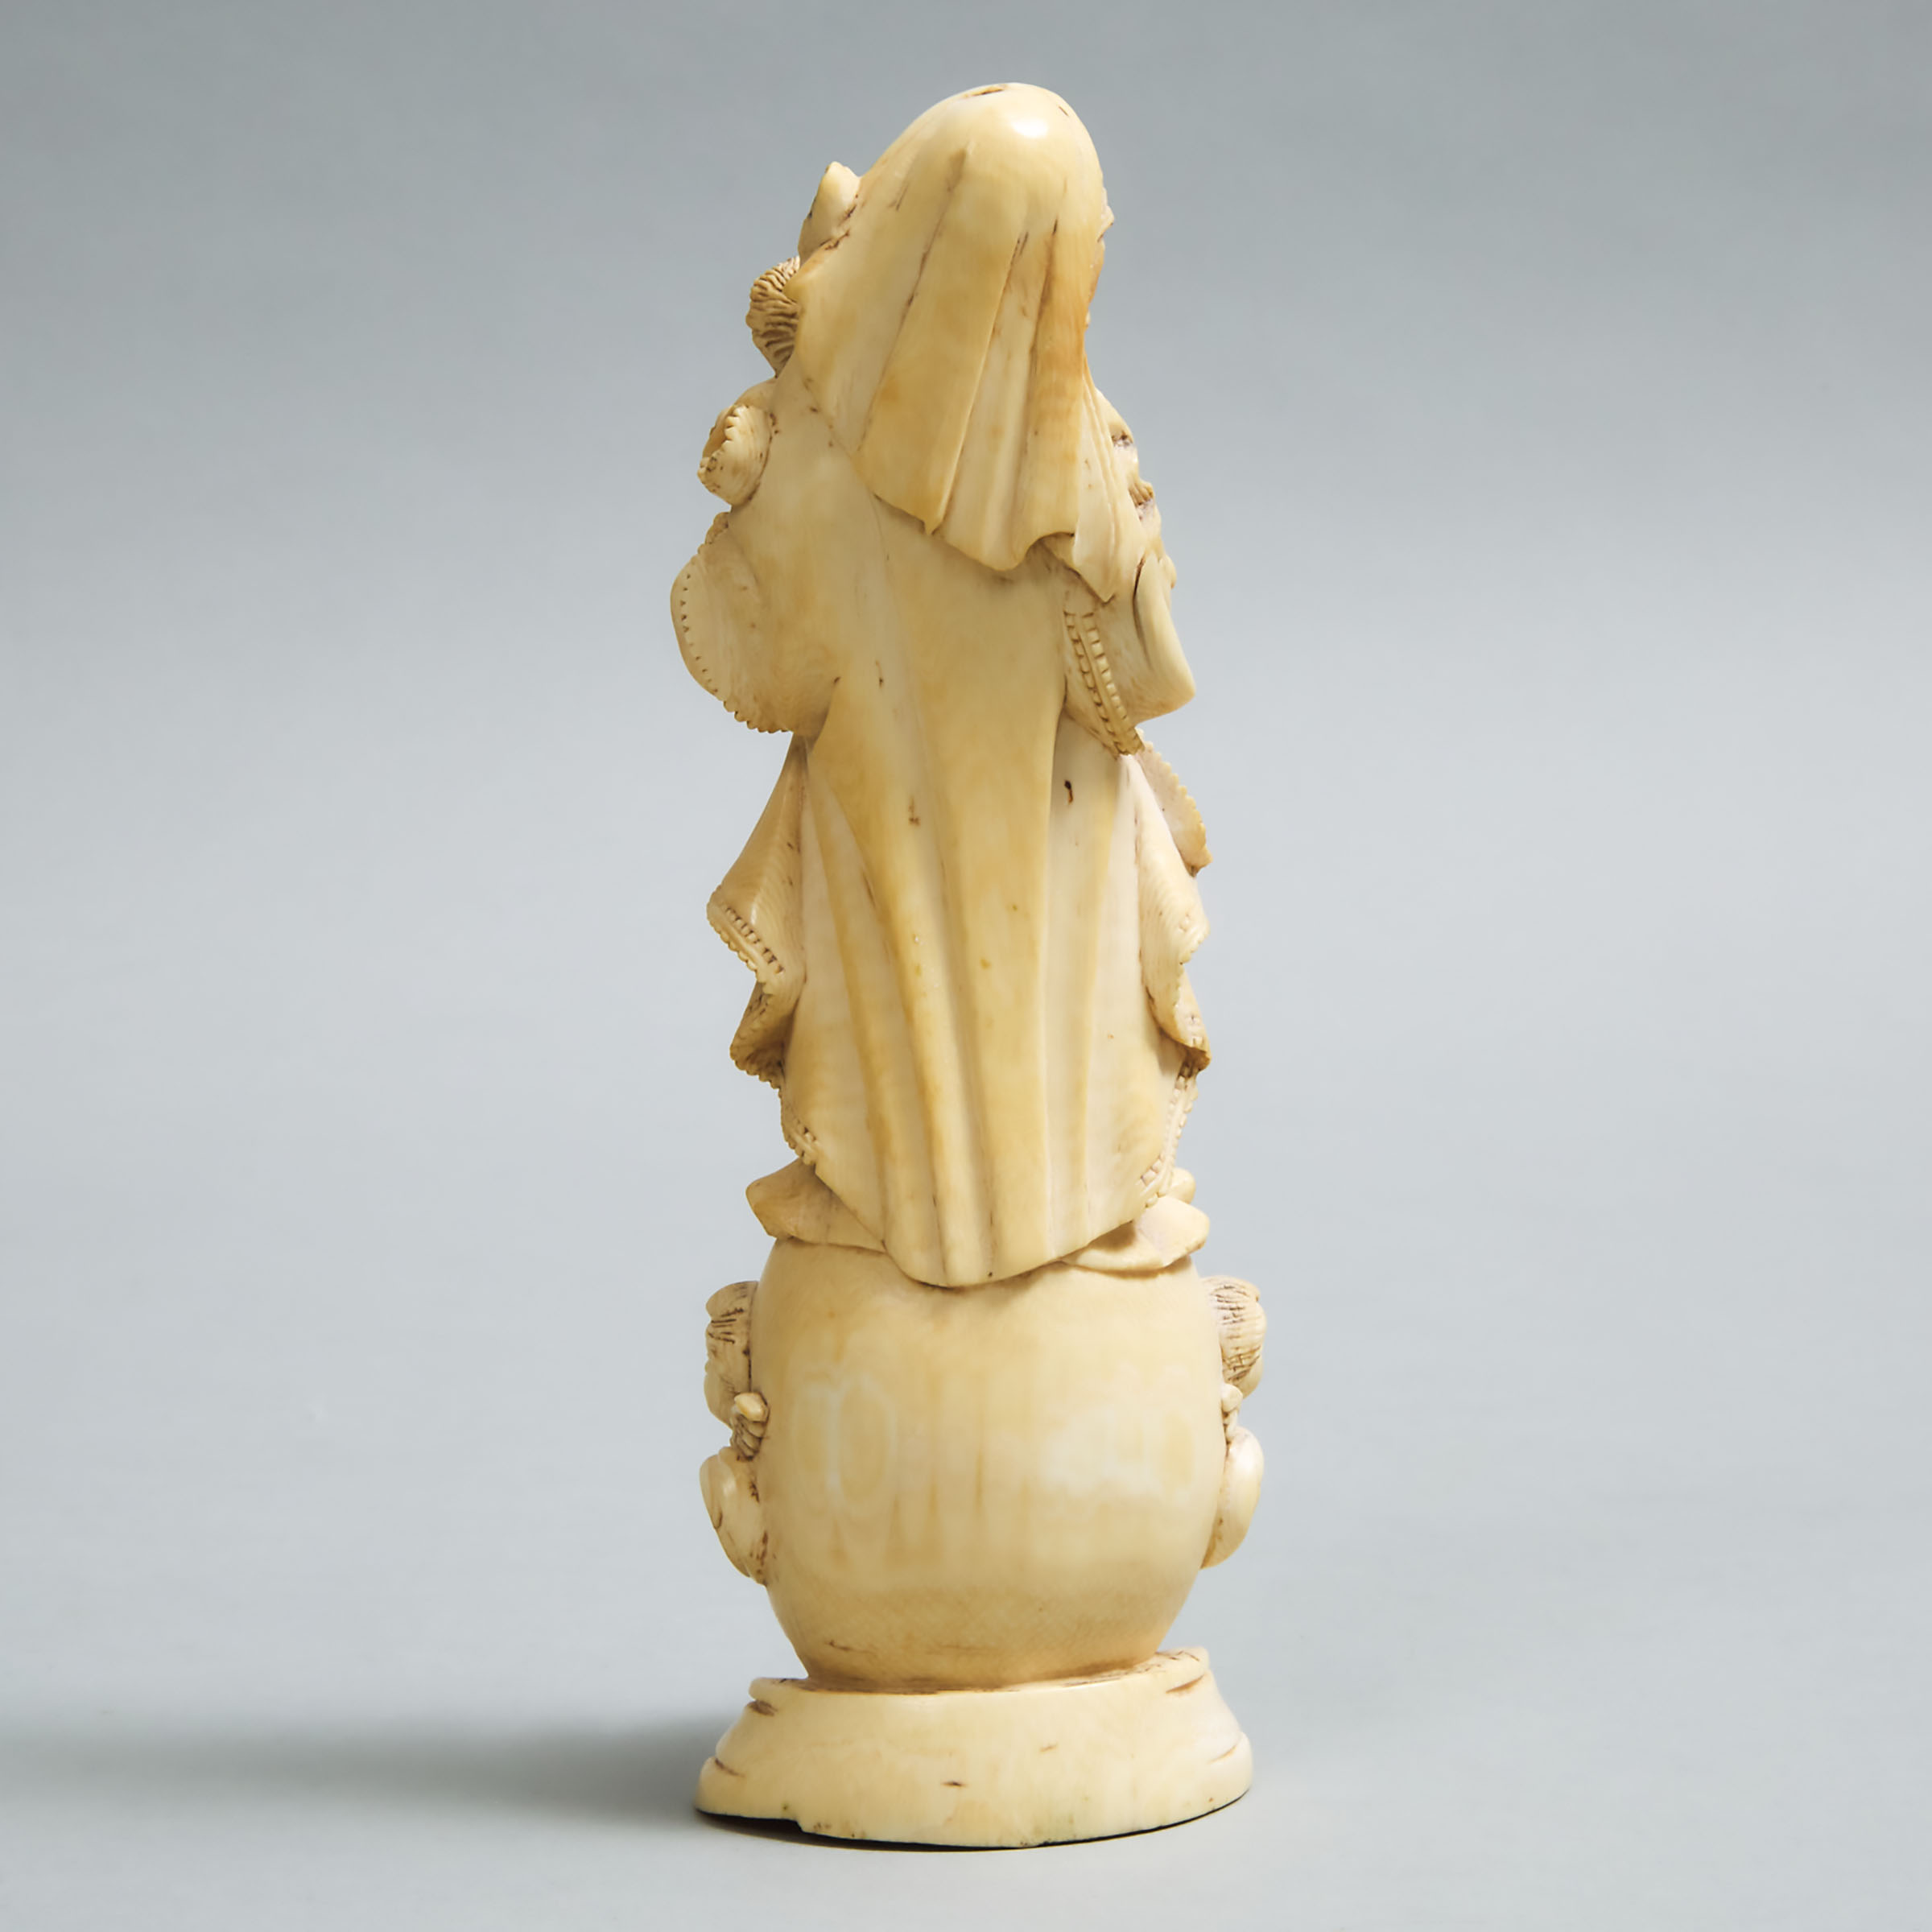 Indo-Portuguese Ivory Figure of Madonna and Child, early 19th century